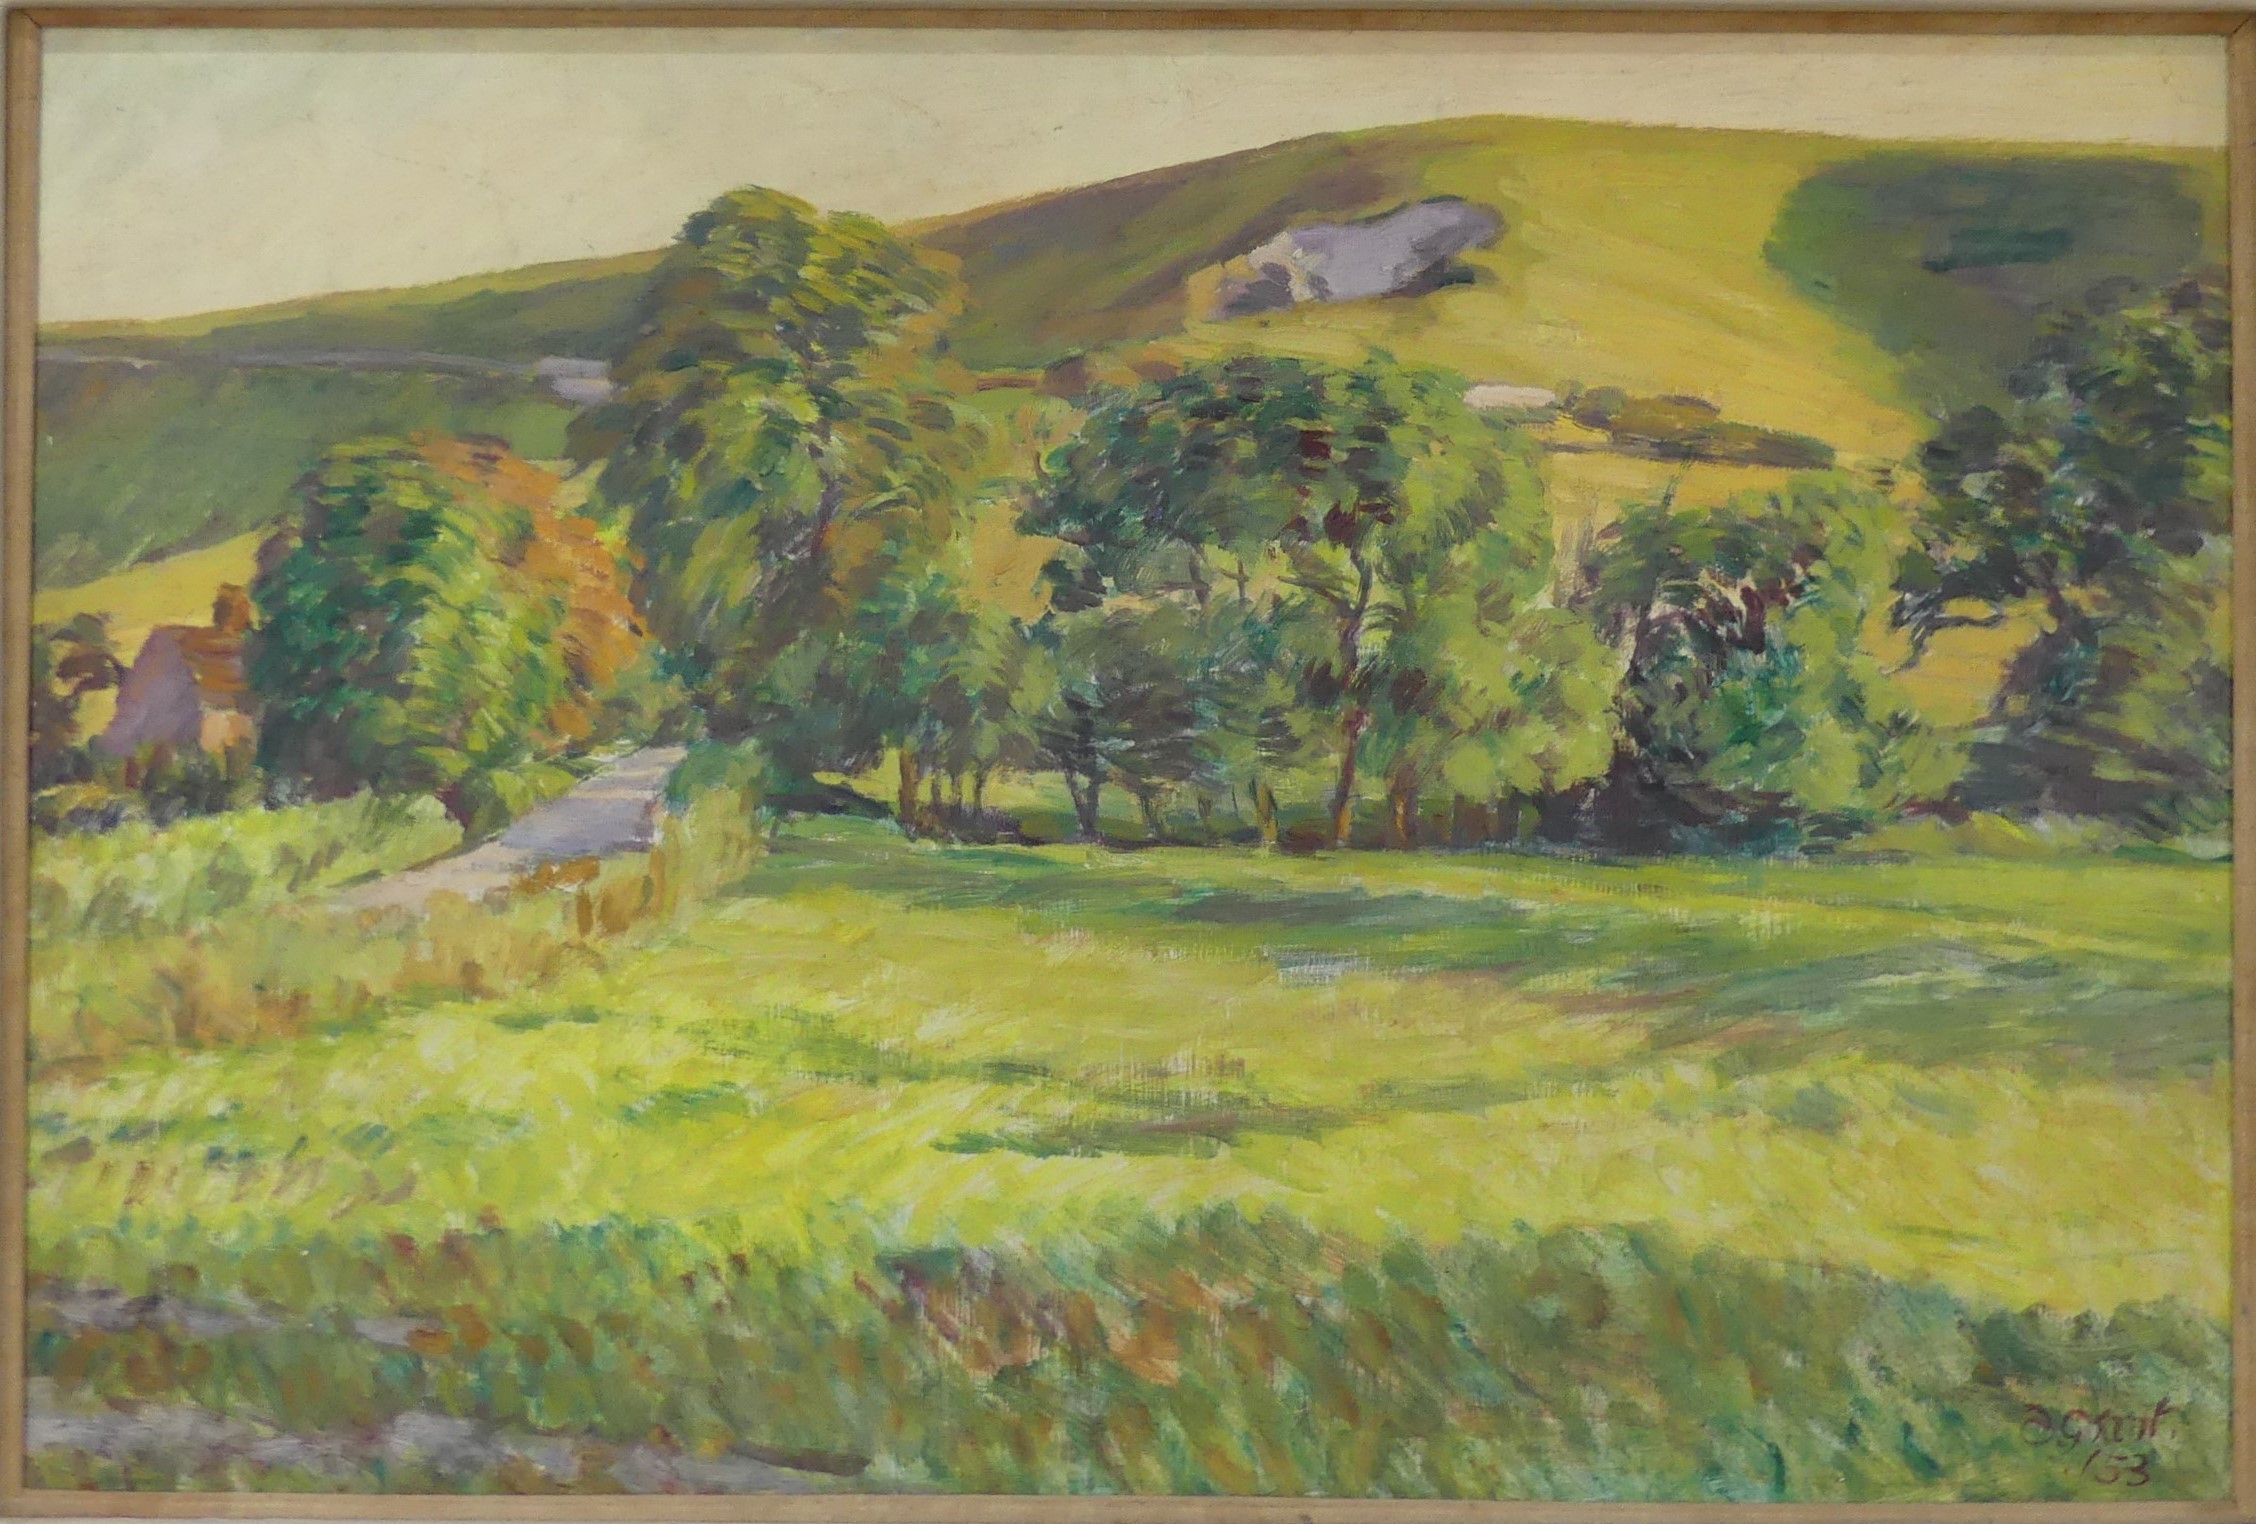 Duncan Grant (British, 1885-1978), Landscape, Firle, oil on board, signed "D. Grant" and dated '53 - Image 2 of 5